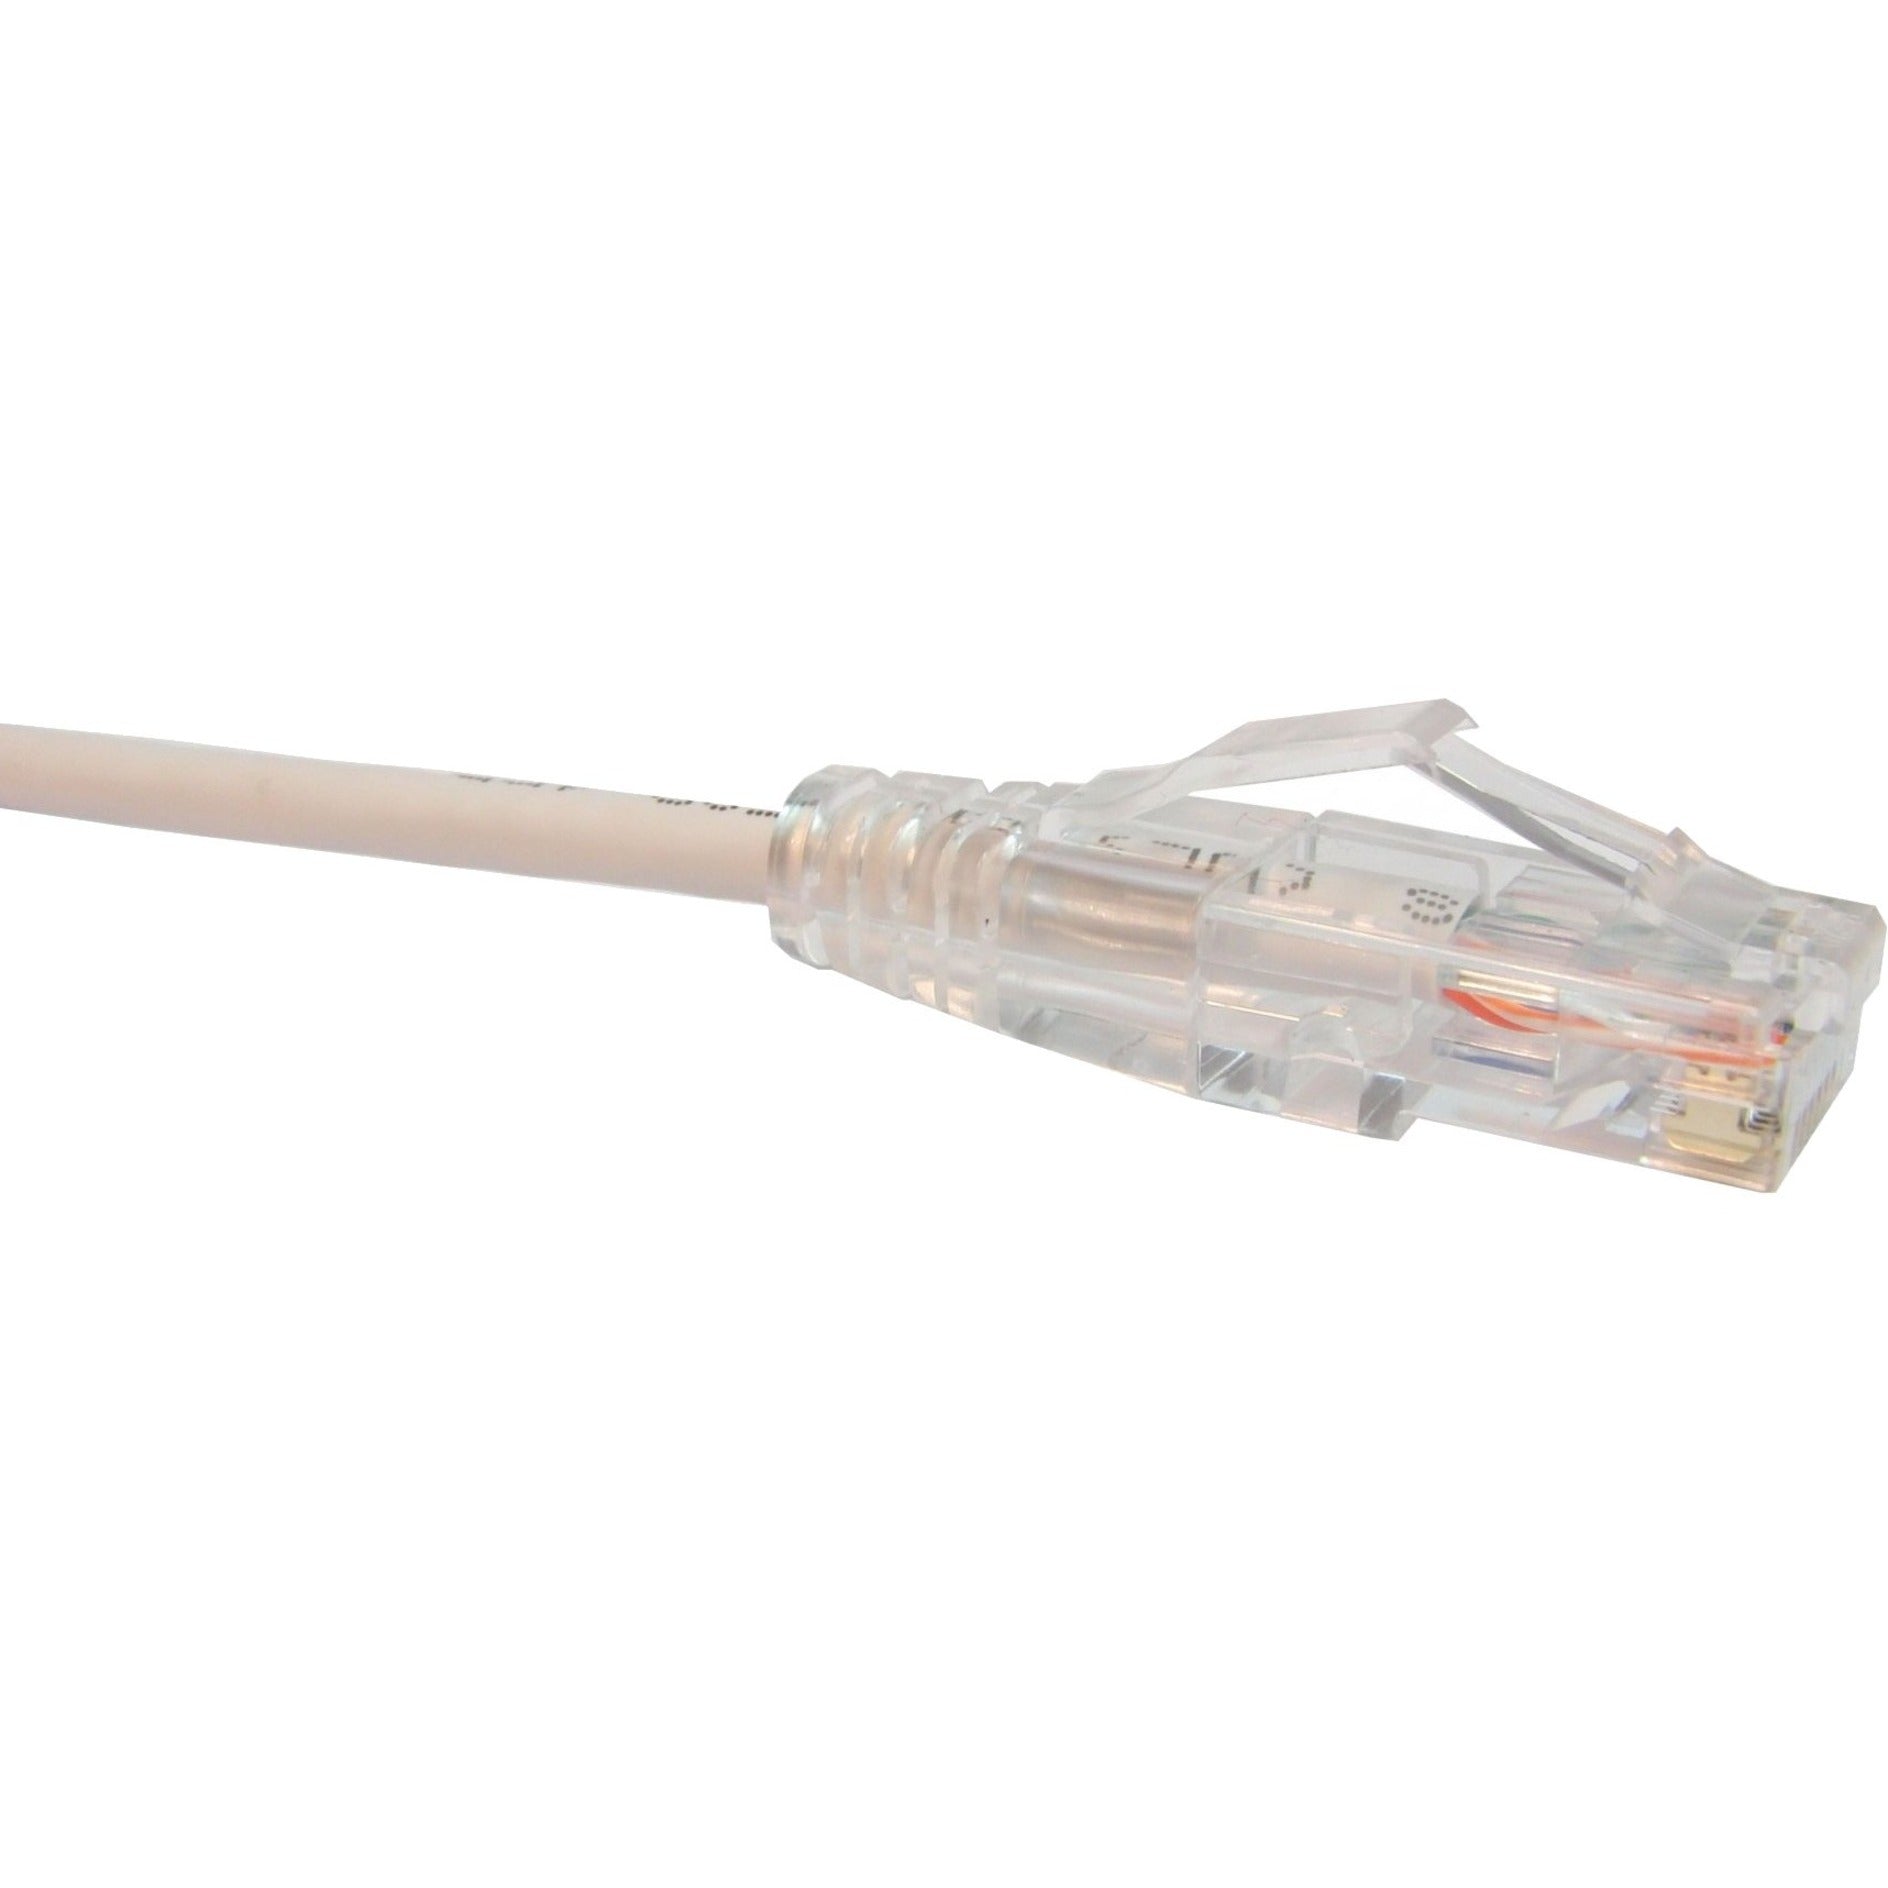 Unirise CS6-20F-WHT Clearfit Slim Cat6 Patch Cable, White, 20ft, Stranded, Flexible, Snagless, Gold Plated